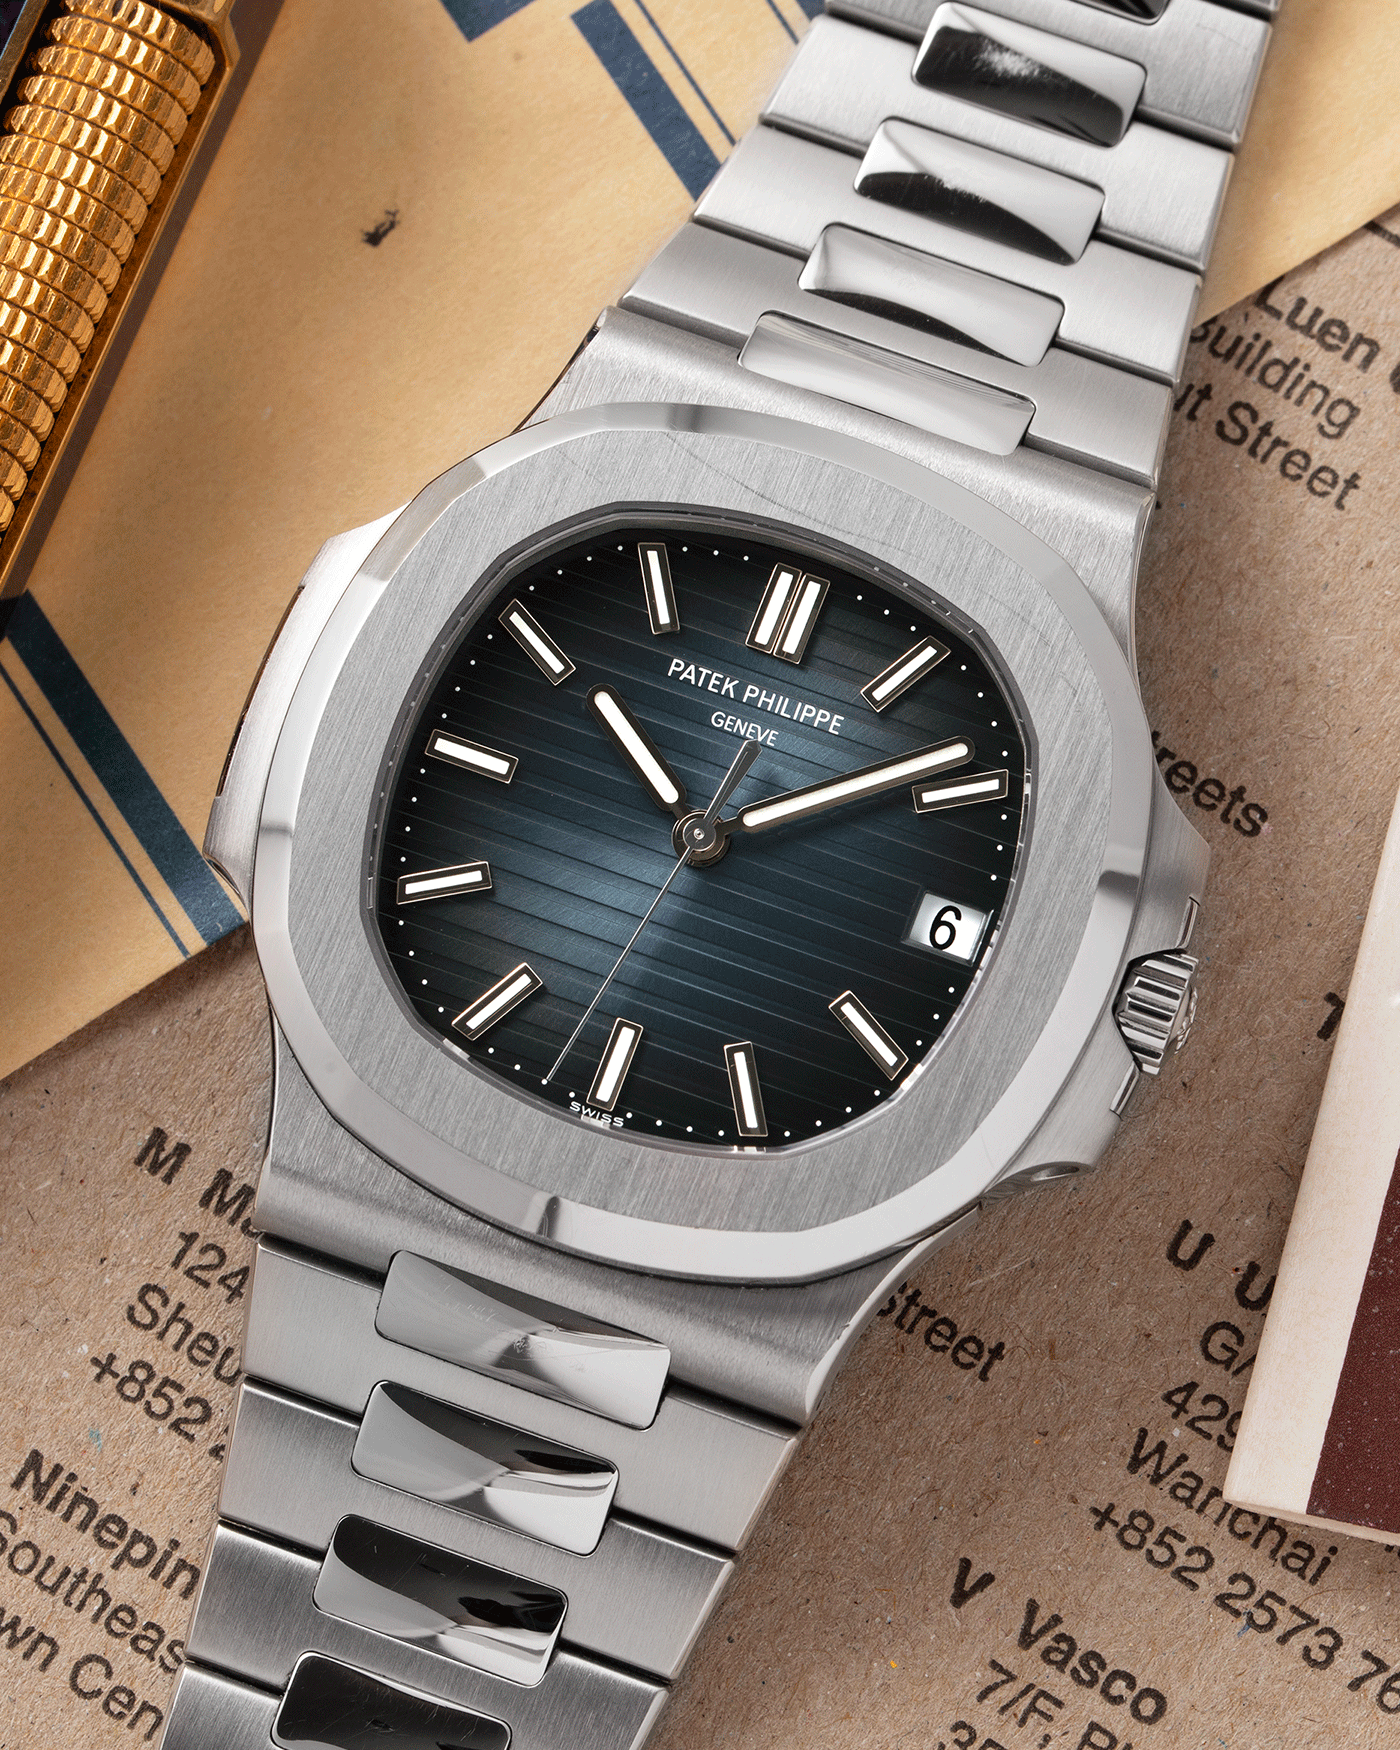 Patek Philippe Nautilus 5711 A Blue Watch | S.Song Timepieces – S.Song ...